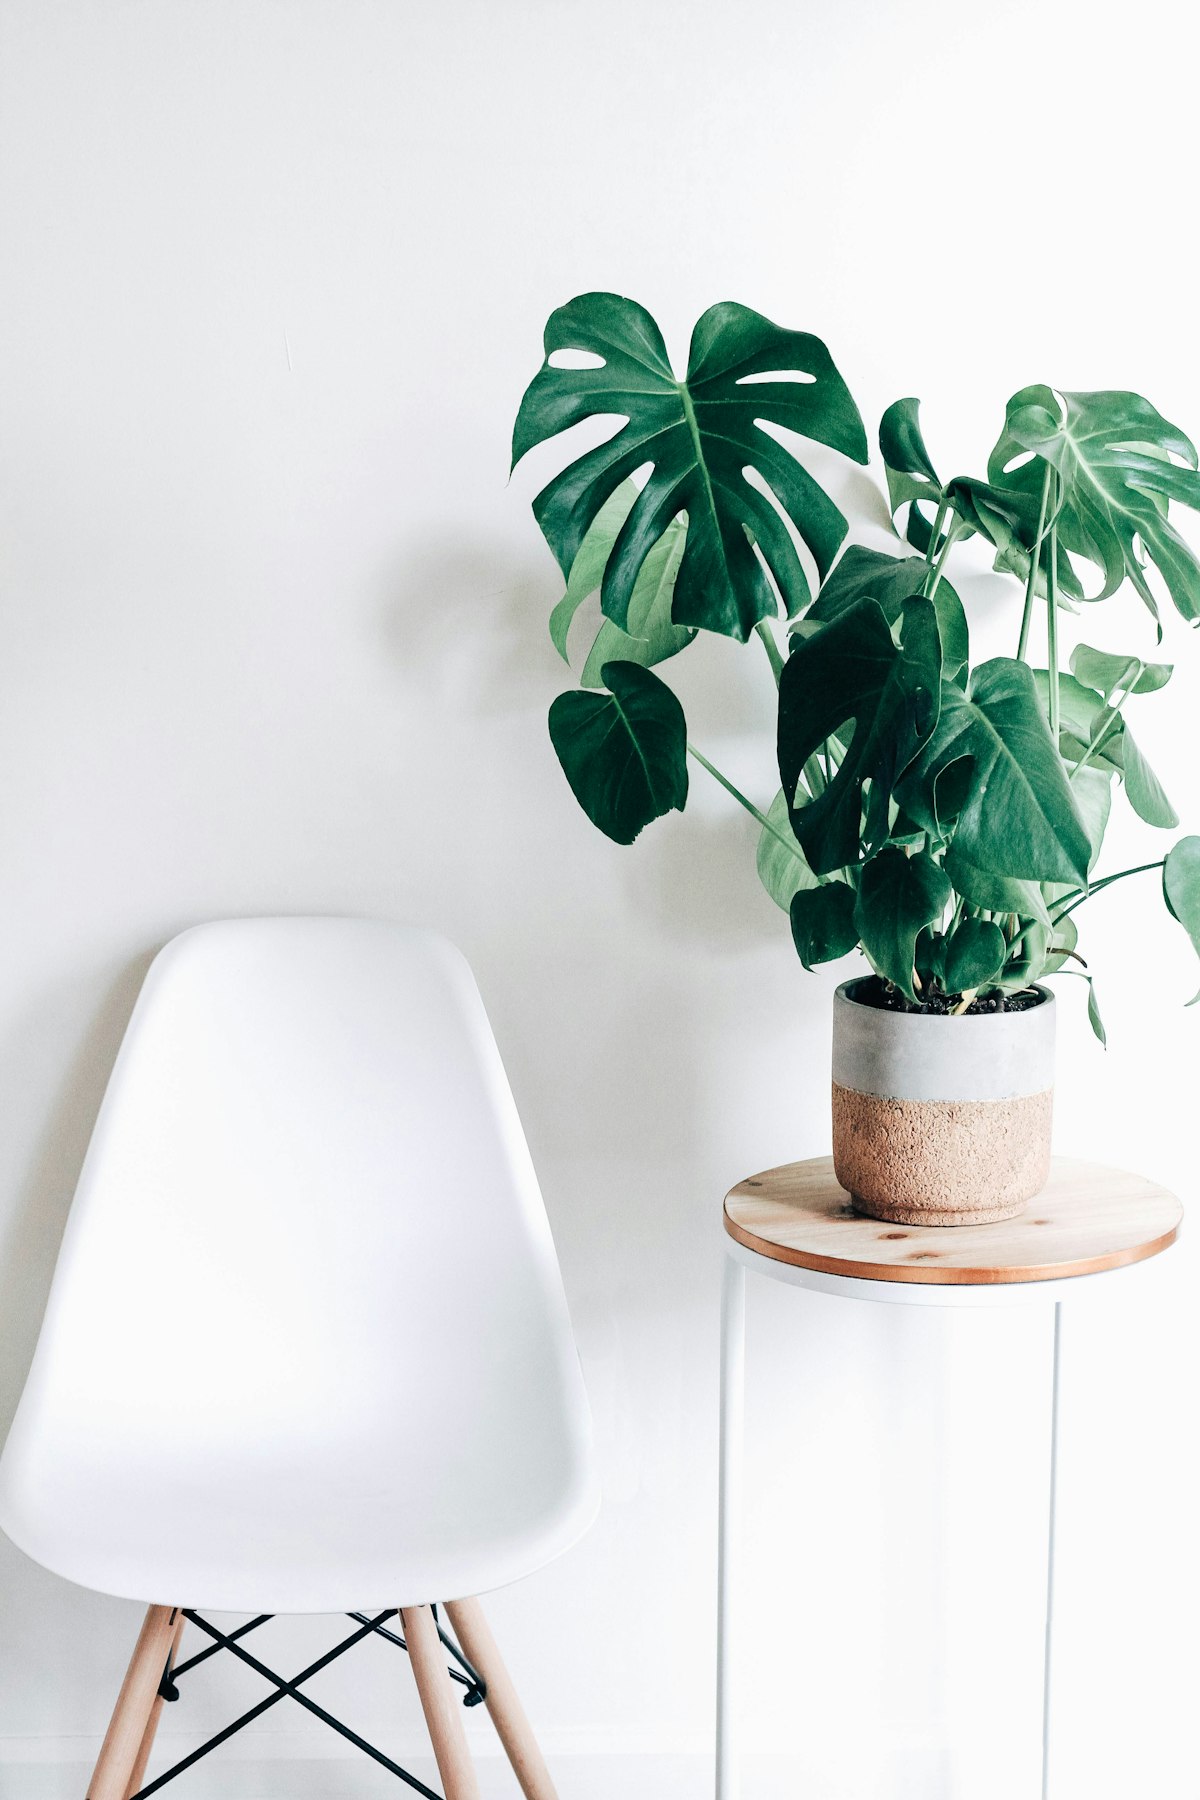 How to Grow Monstera